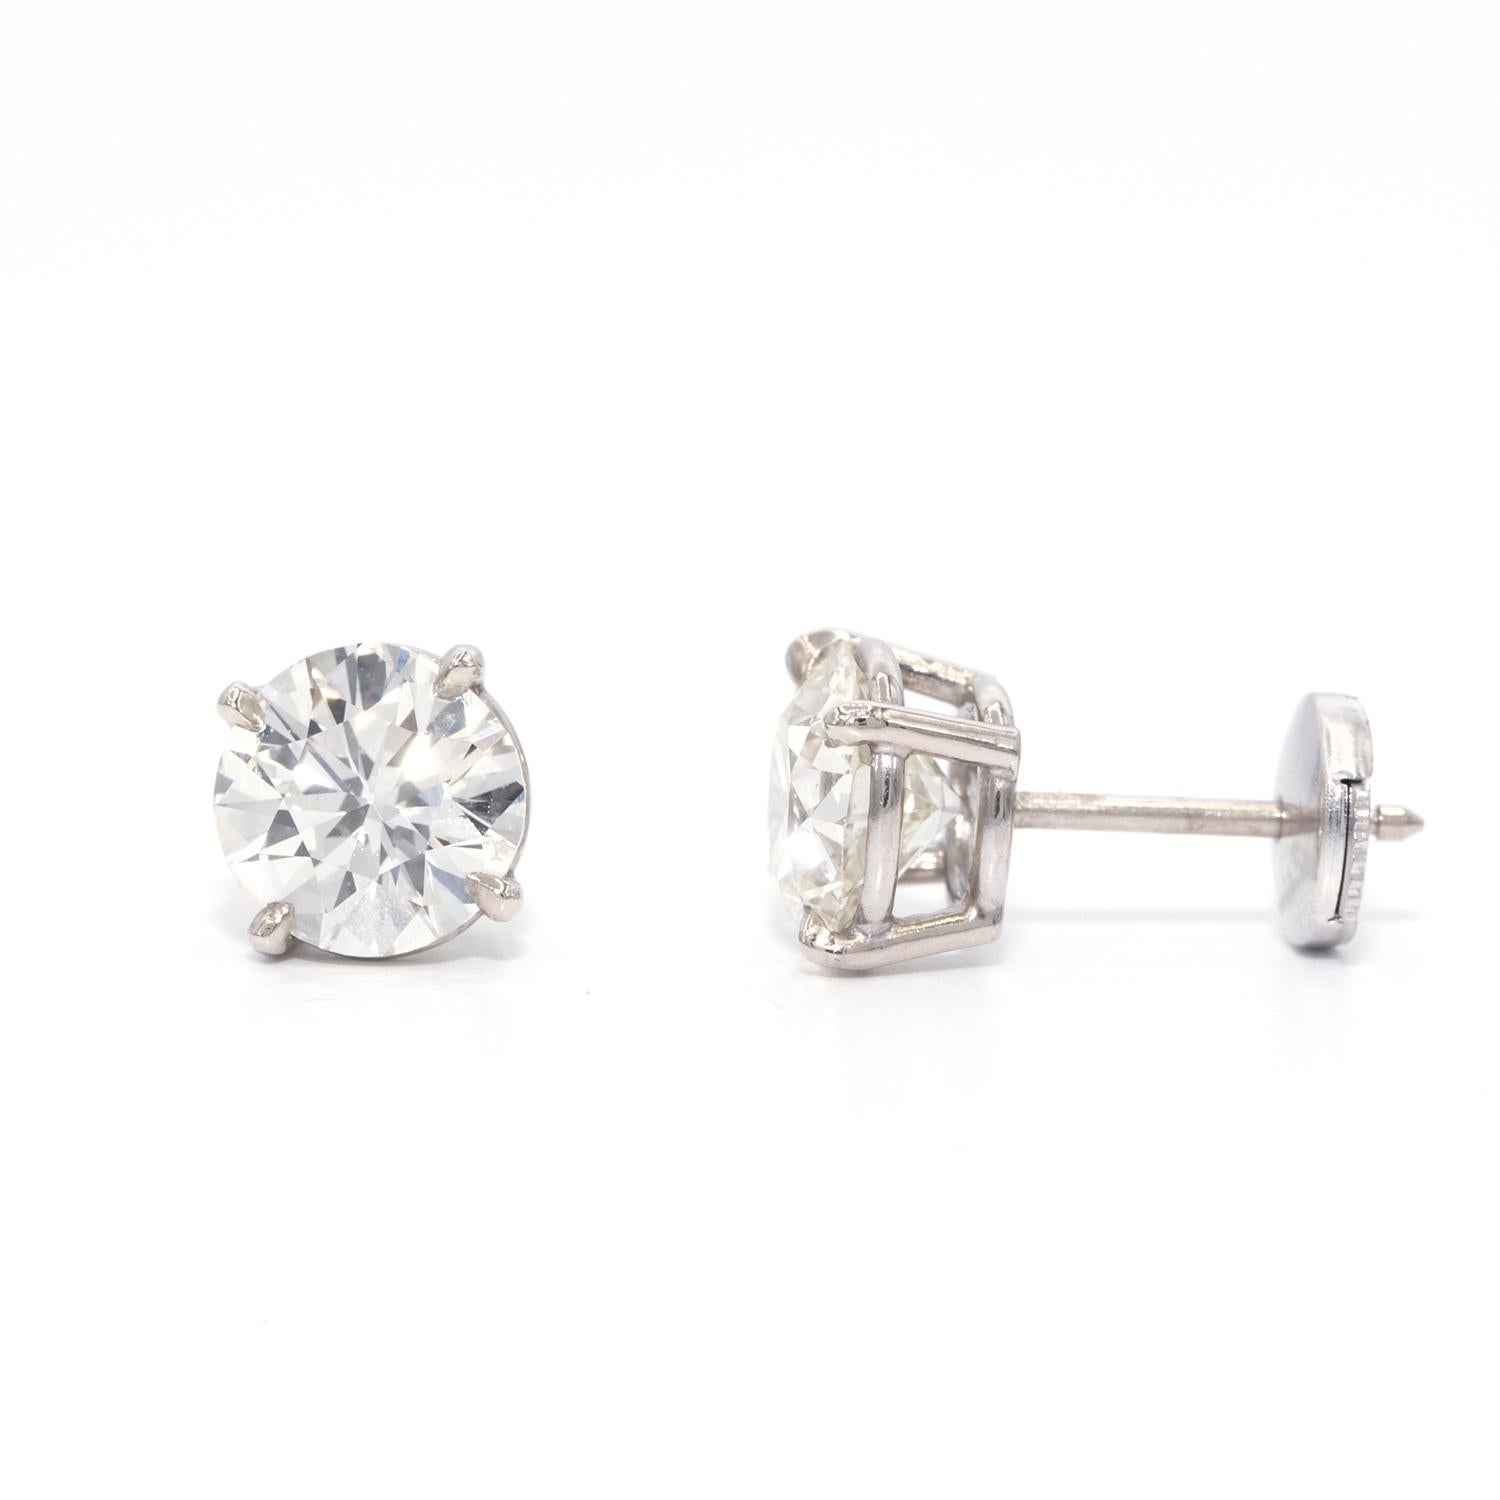 These natural diamond stud earrings are classic and a must have.
1.41 carat and 1.36 carat round diamonds, with k color and vs clarity. full of brilliance and sparkle, set in a luxurious 14 karat white gold martini setting.

An outstanding gift for